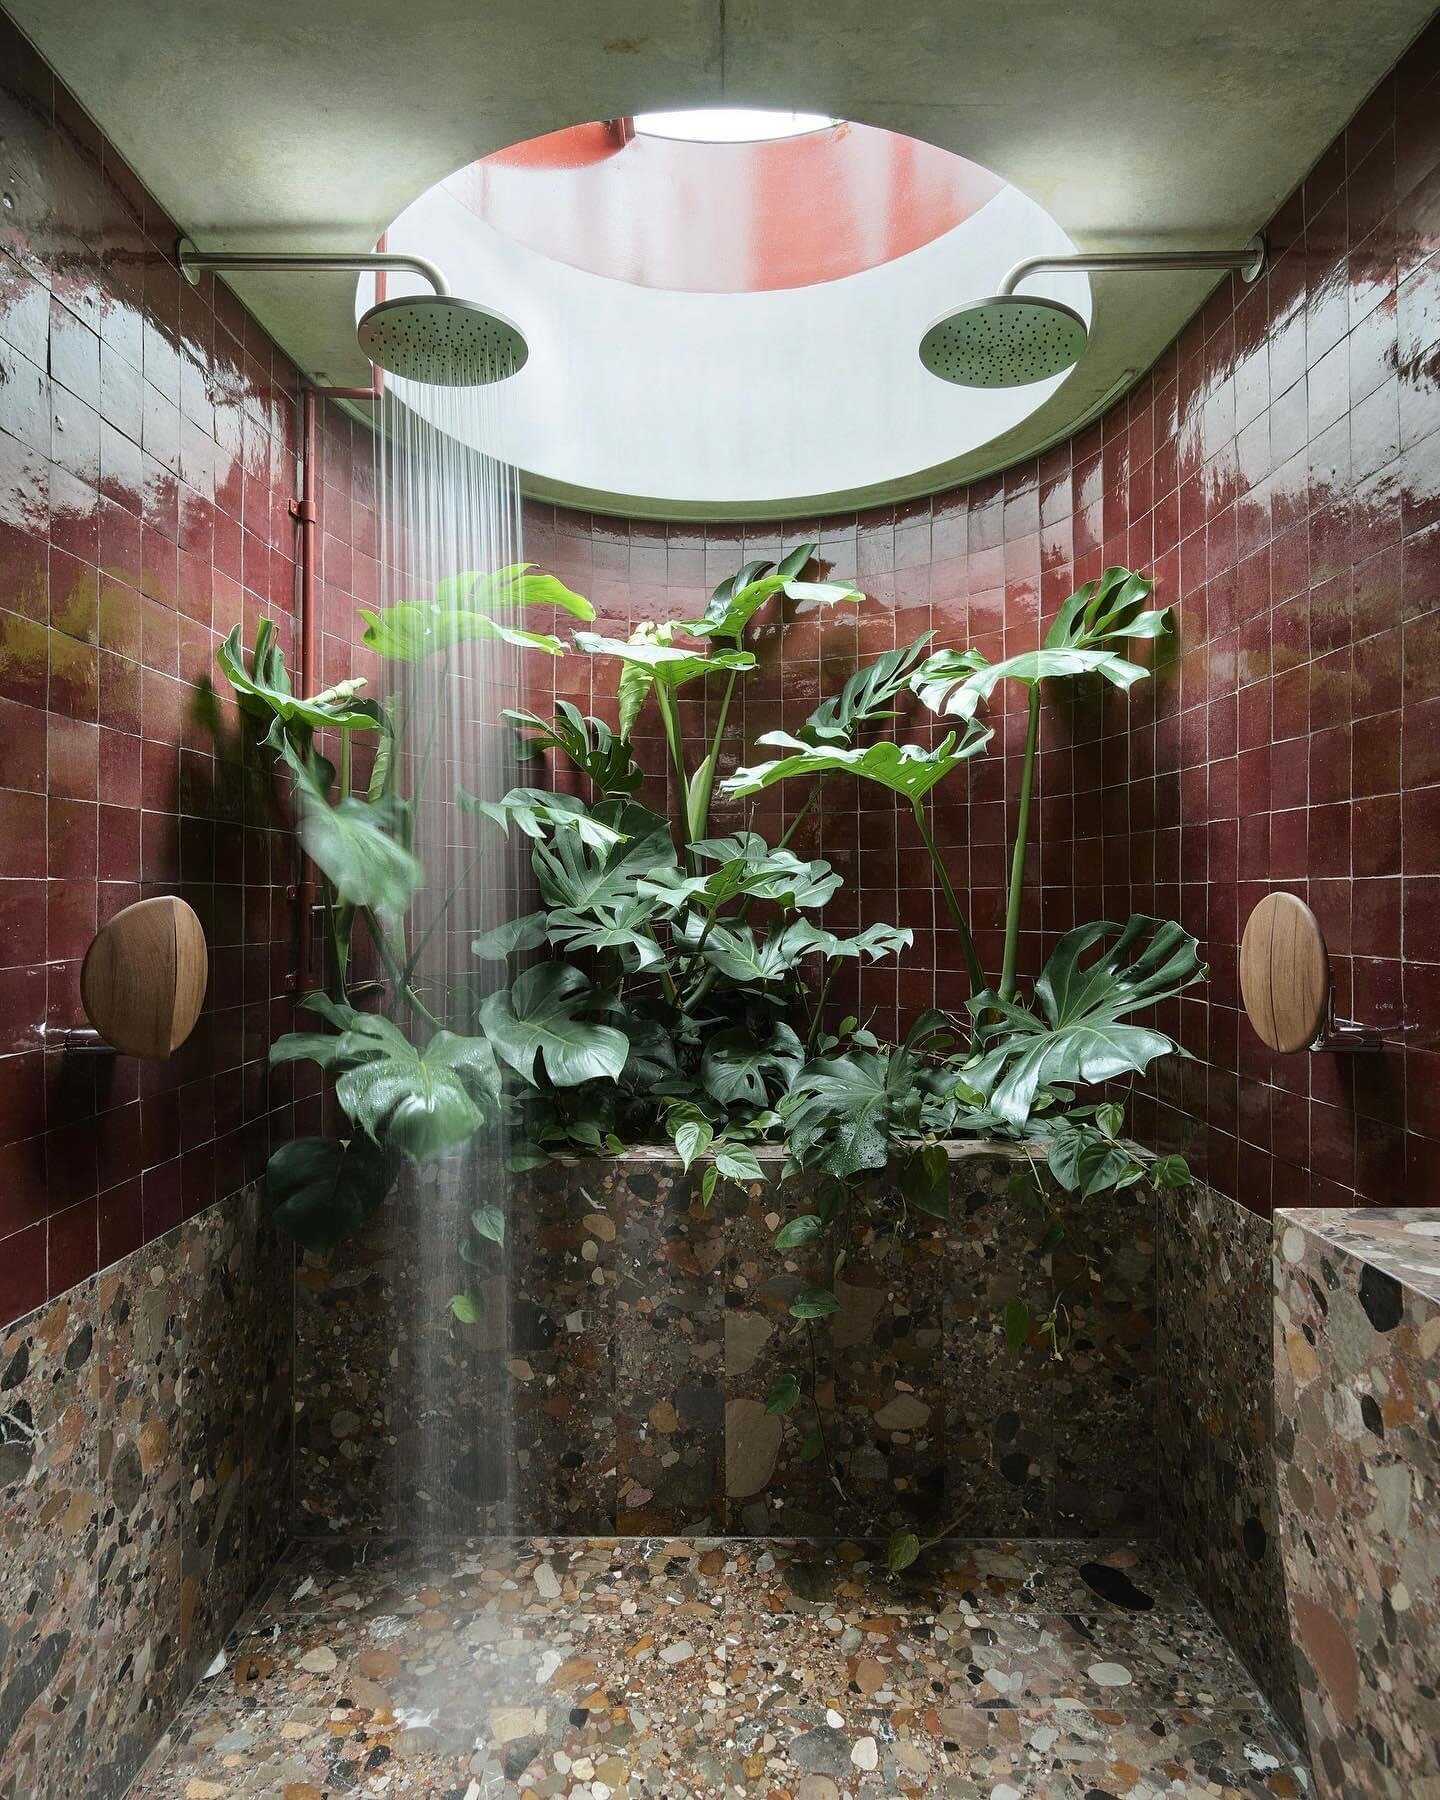 All this rainy weather has me thinking about this dream rain shower situation I had saved a bit ago. There&rsquo;s just something so inherently cozy and heavenly about mixing a mature lived-in monstera plants and terrazzo stone&hellip;I am in love. I